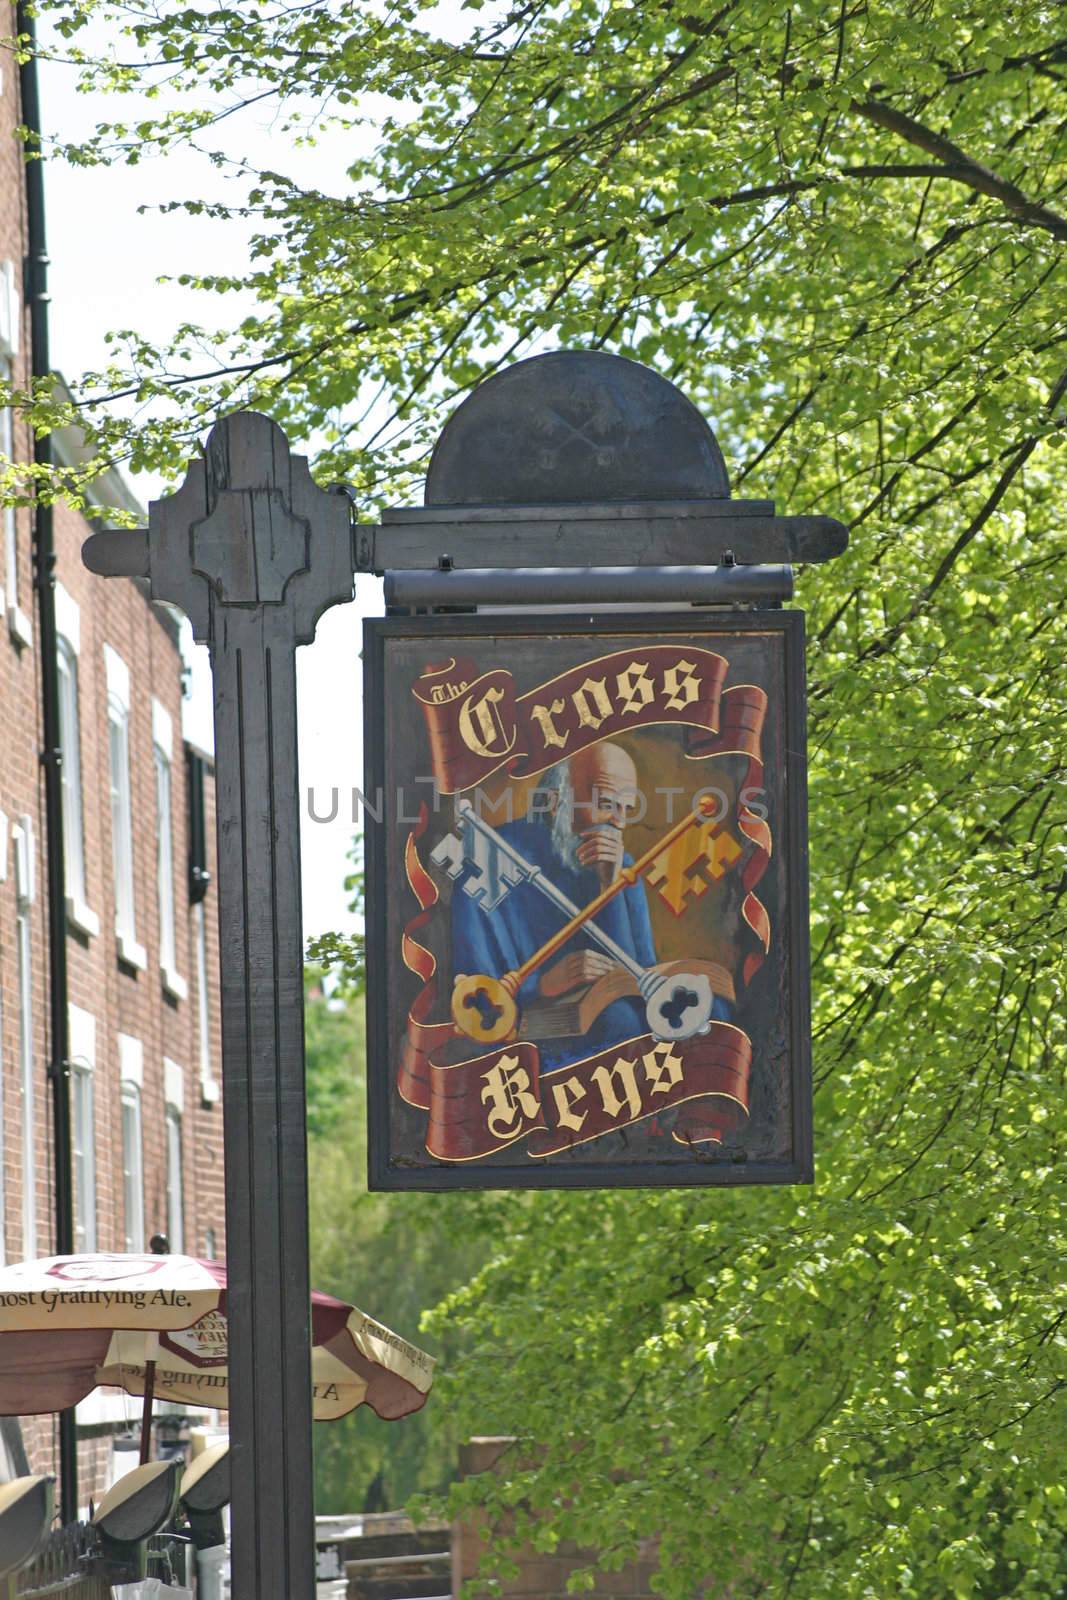 Old Pub Sign in Chester England